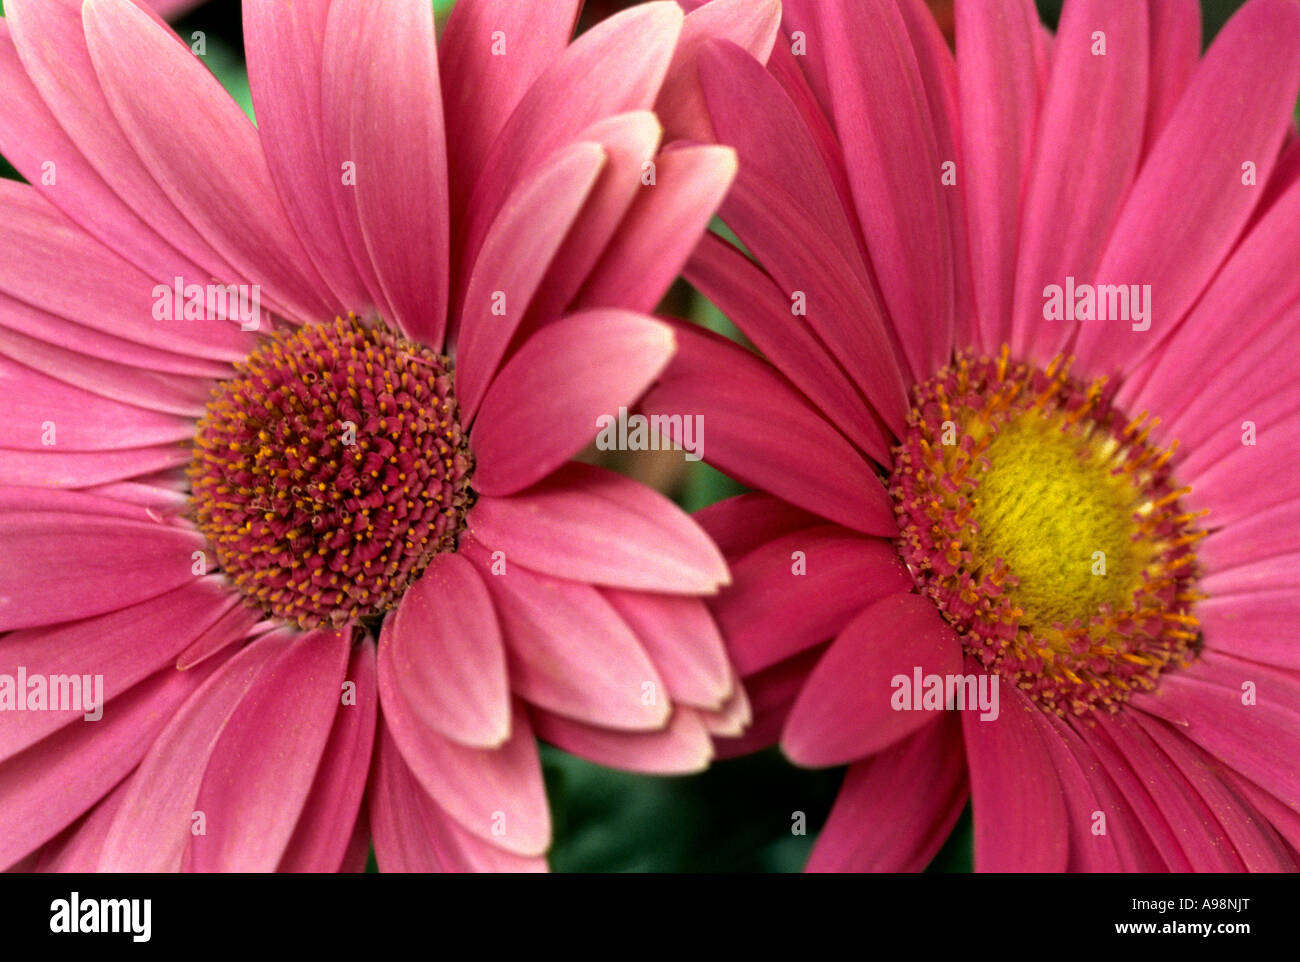 African daisy, Gerbera Jamesonii - Asteraceae, Compositae flower corolla colur pink blossom close up Stock Photo